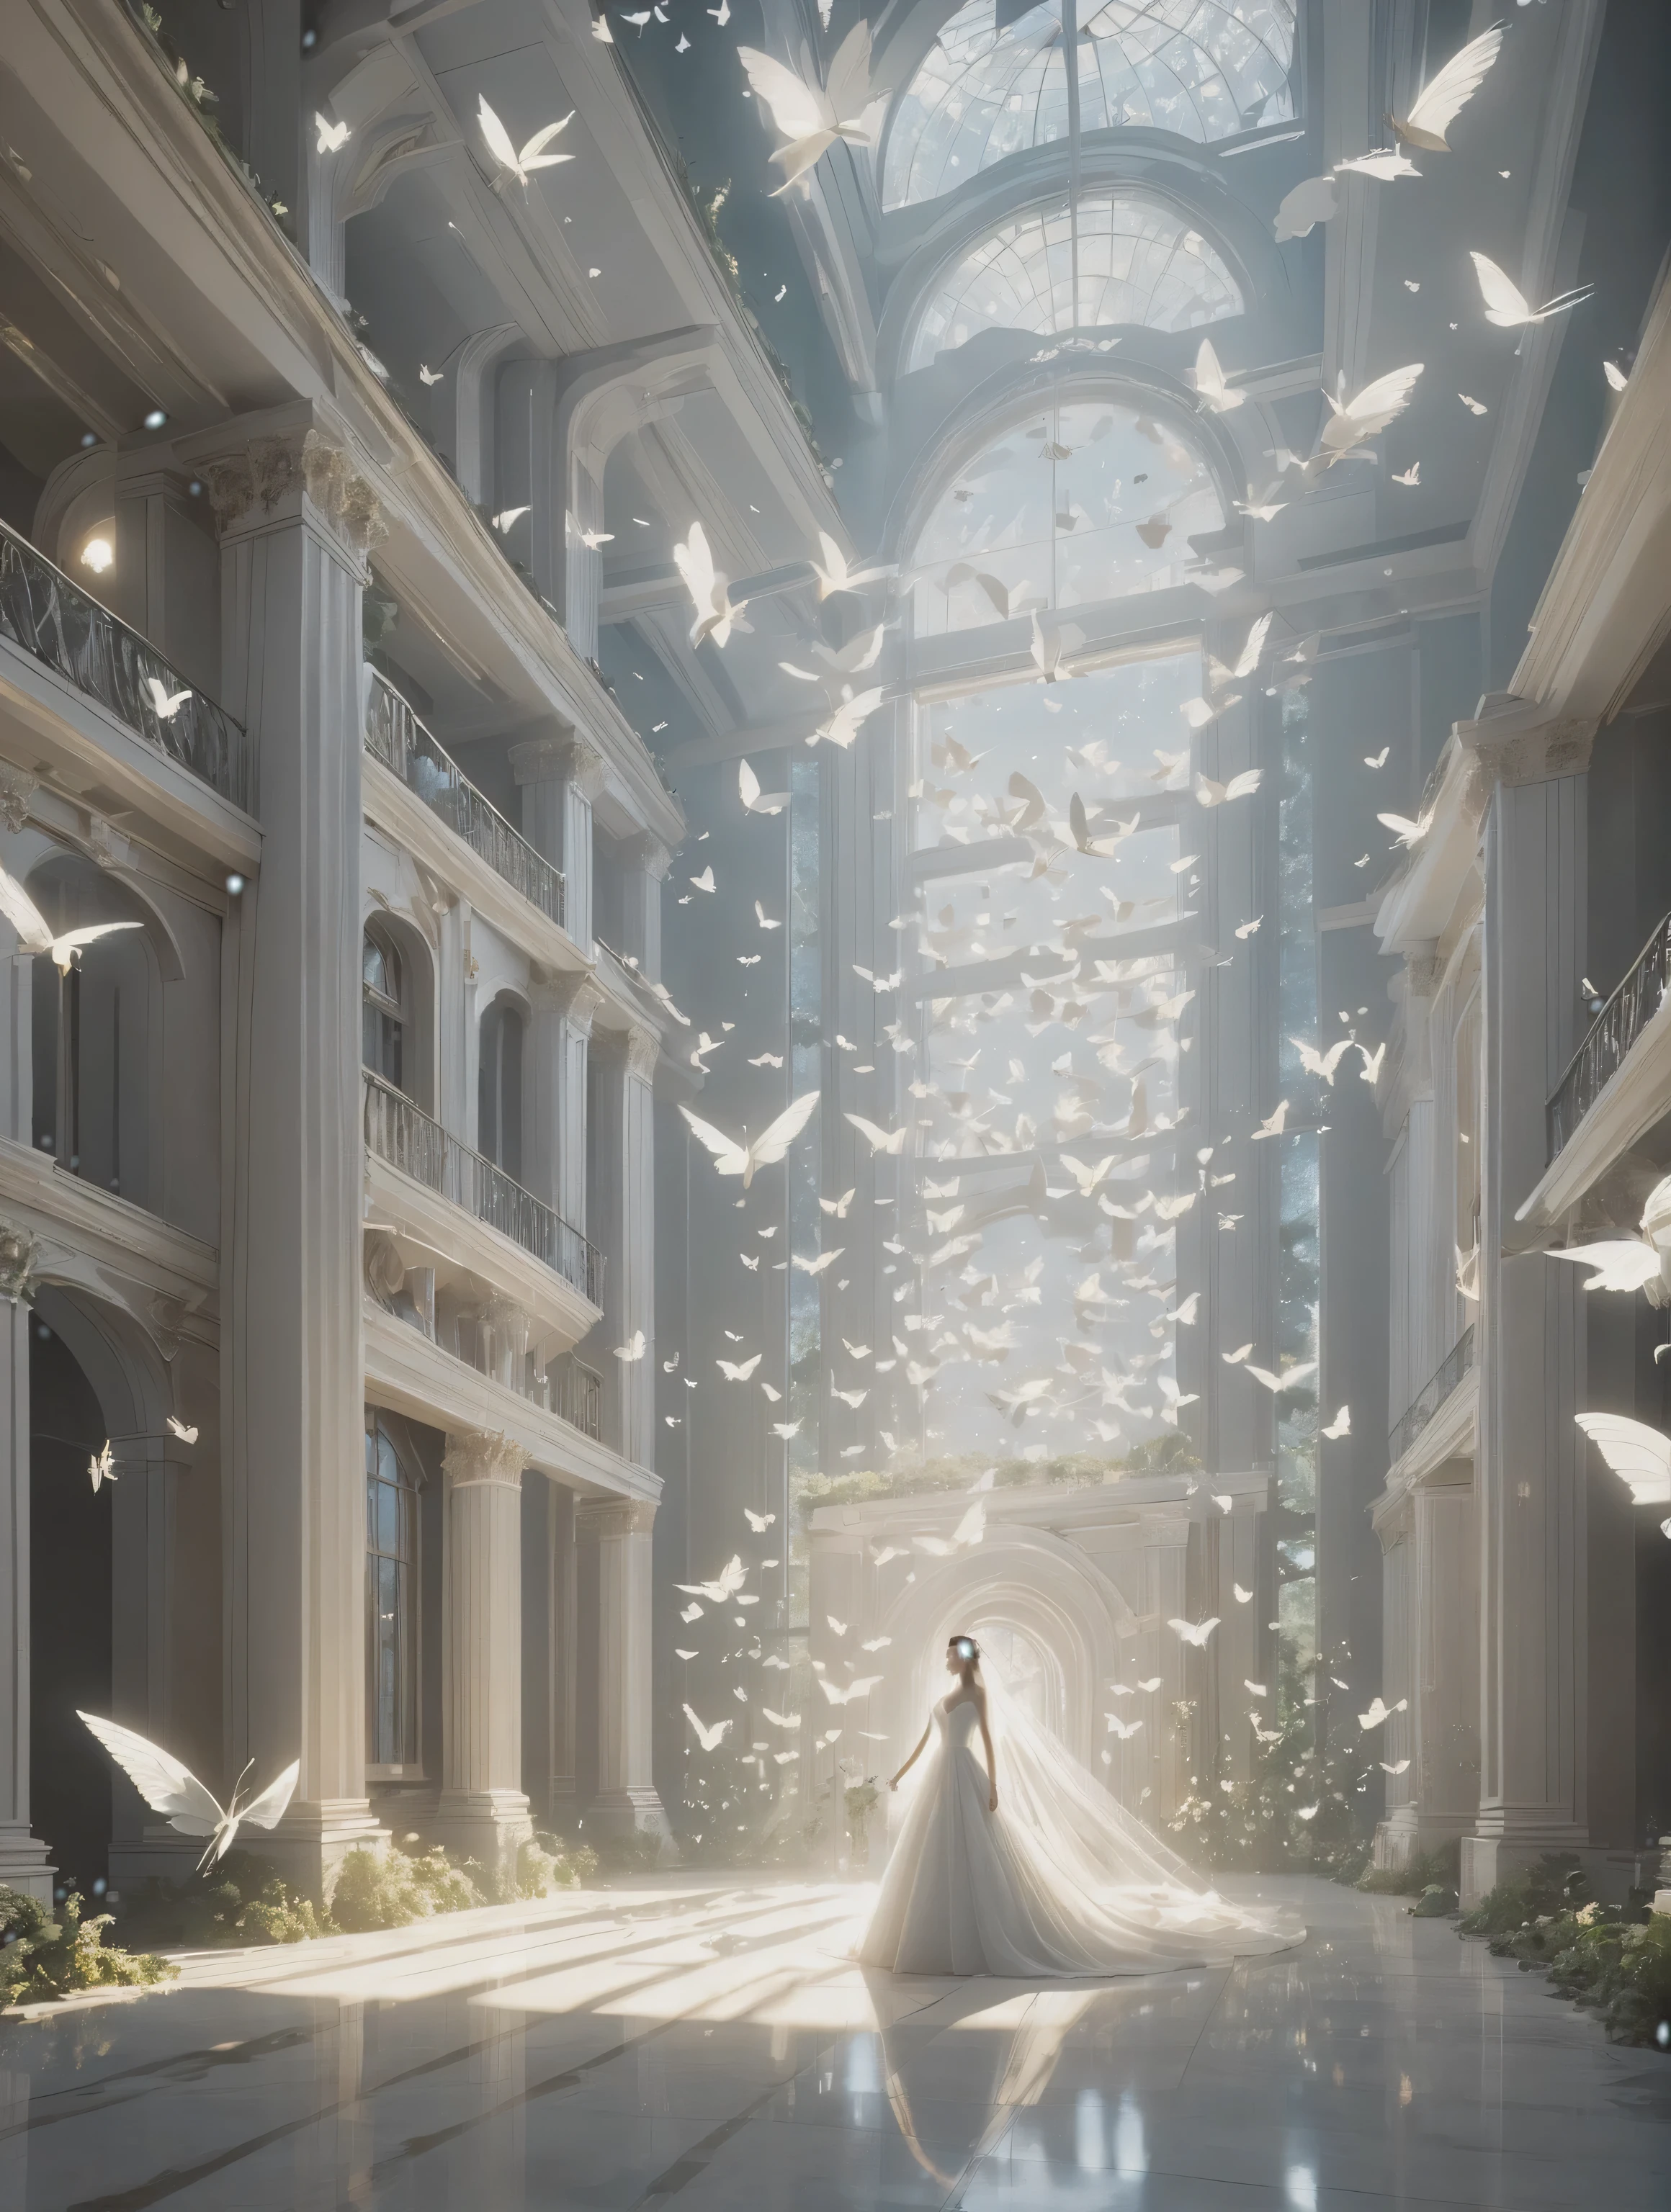 There are many white birds flying in the sky inside the building, global illumination. Visual effects, highly detailed surreal Visual effects, Butterflies flying in the sky, Volumetric light ， surreal, . movie stills, epic Volumetric lighting, Volumetric light from above, Dramatic dream lighting, Obras de arte intrincadas. octane rendering, ethereal Volumetric light, Volumetric lighting. fantasy，Mixed forest，wedding inspiration，bride